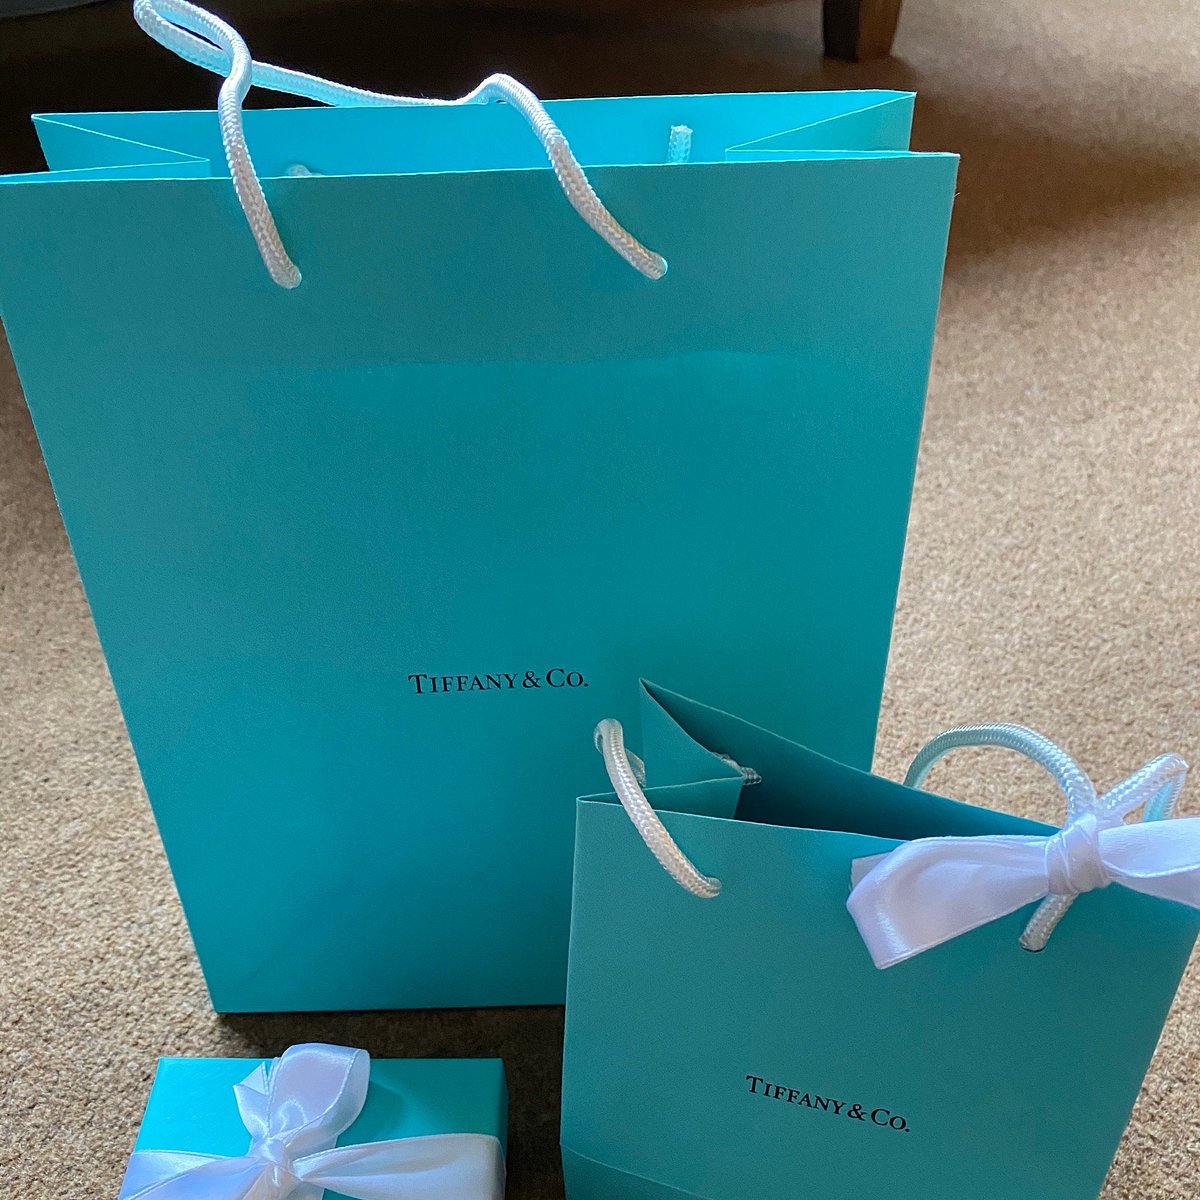 Tiffany & Co. (London) - All You Need to Know BEFORE You Go